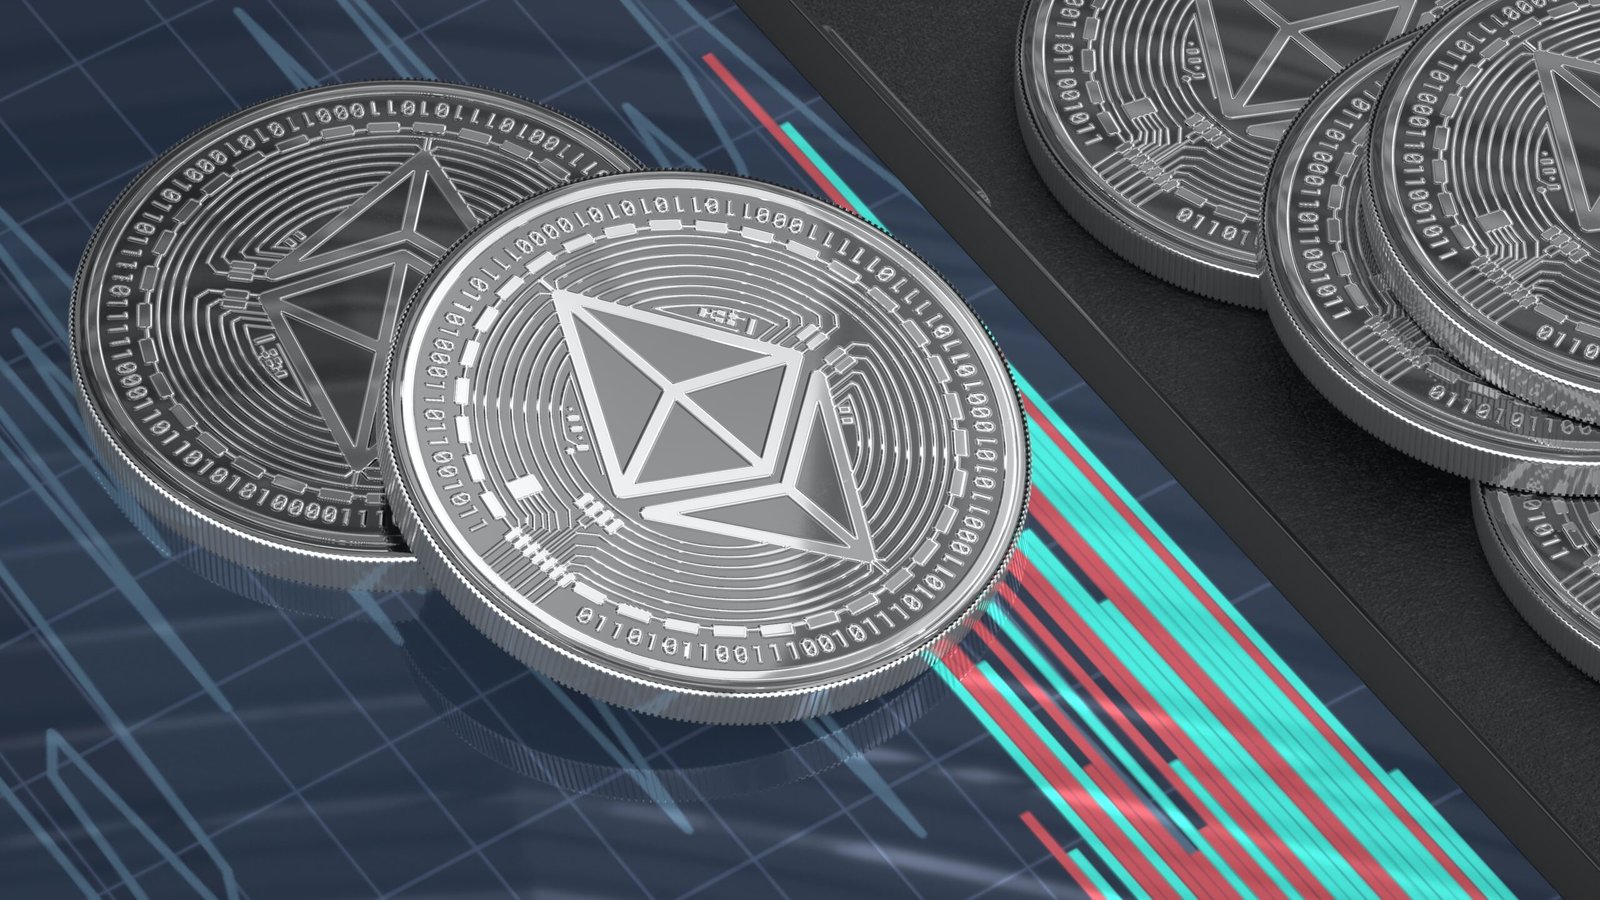 Ethereum and Bitcoin: The Biggest Gainers in the Next Bull Run